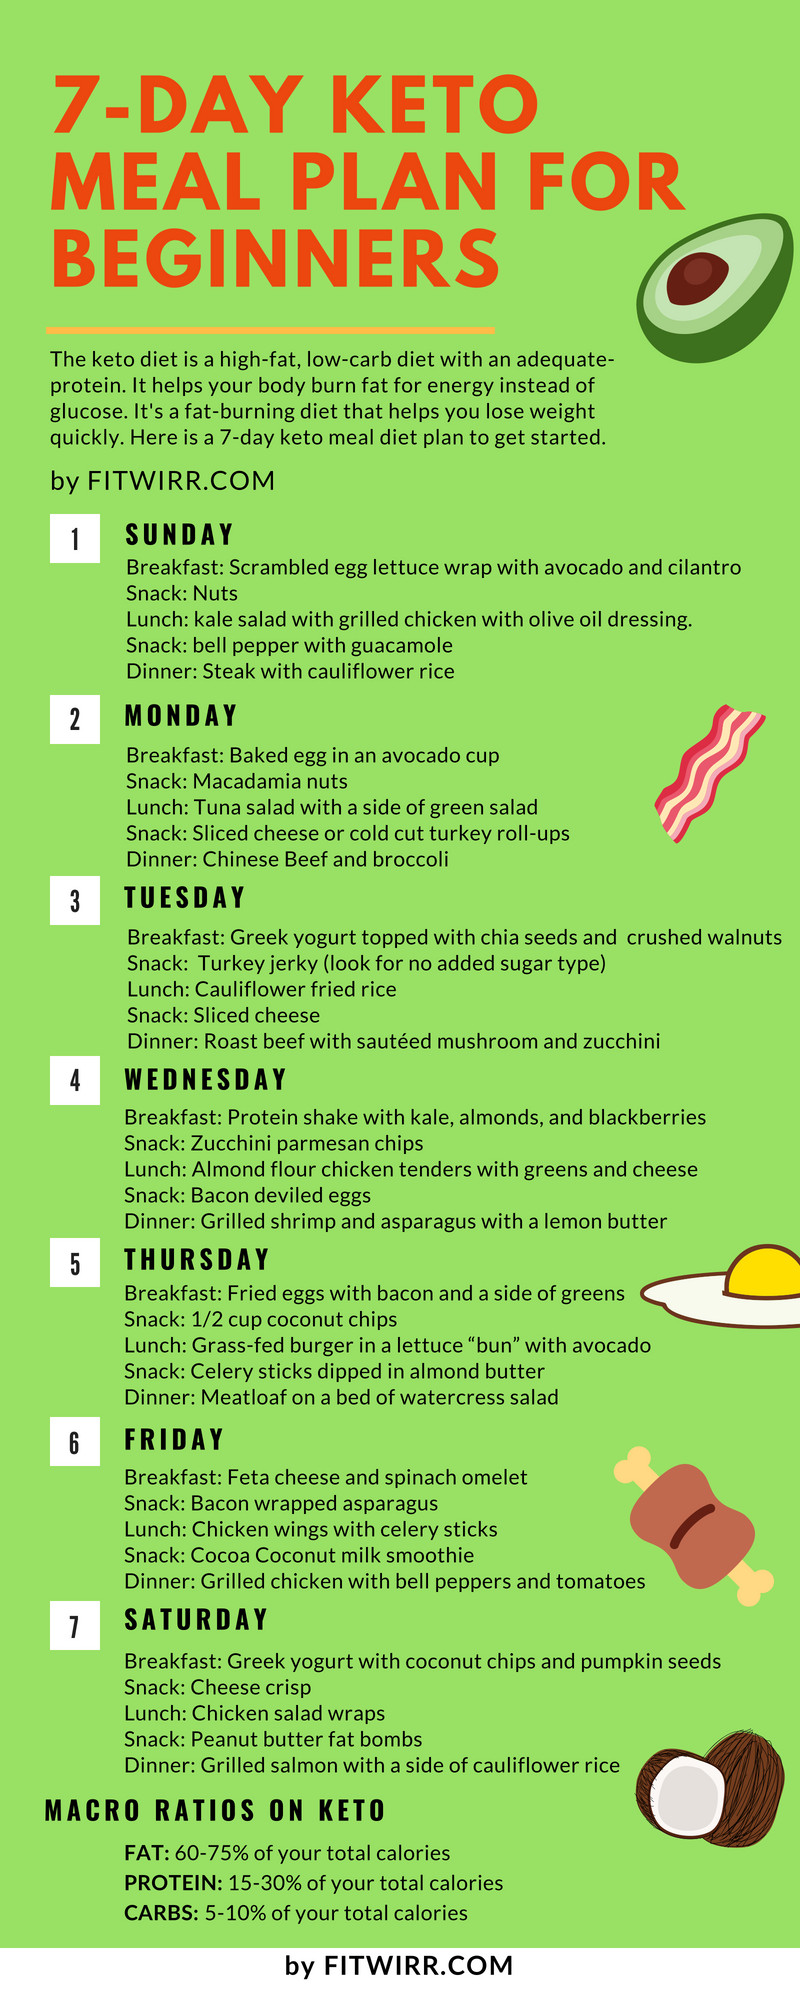 Keto For Beginners Meal Plan On A Budget
 Keto Diet Menu 7 Day Keto Meal Plan for Beginners to Lose